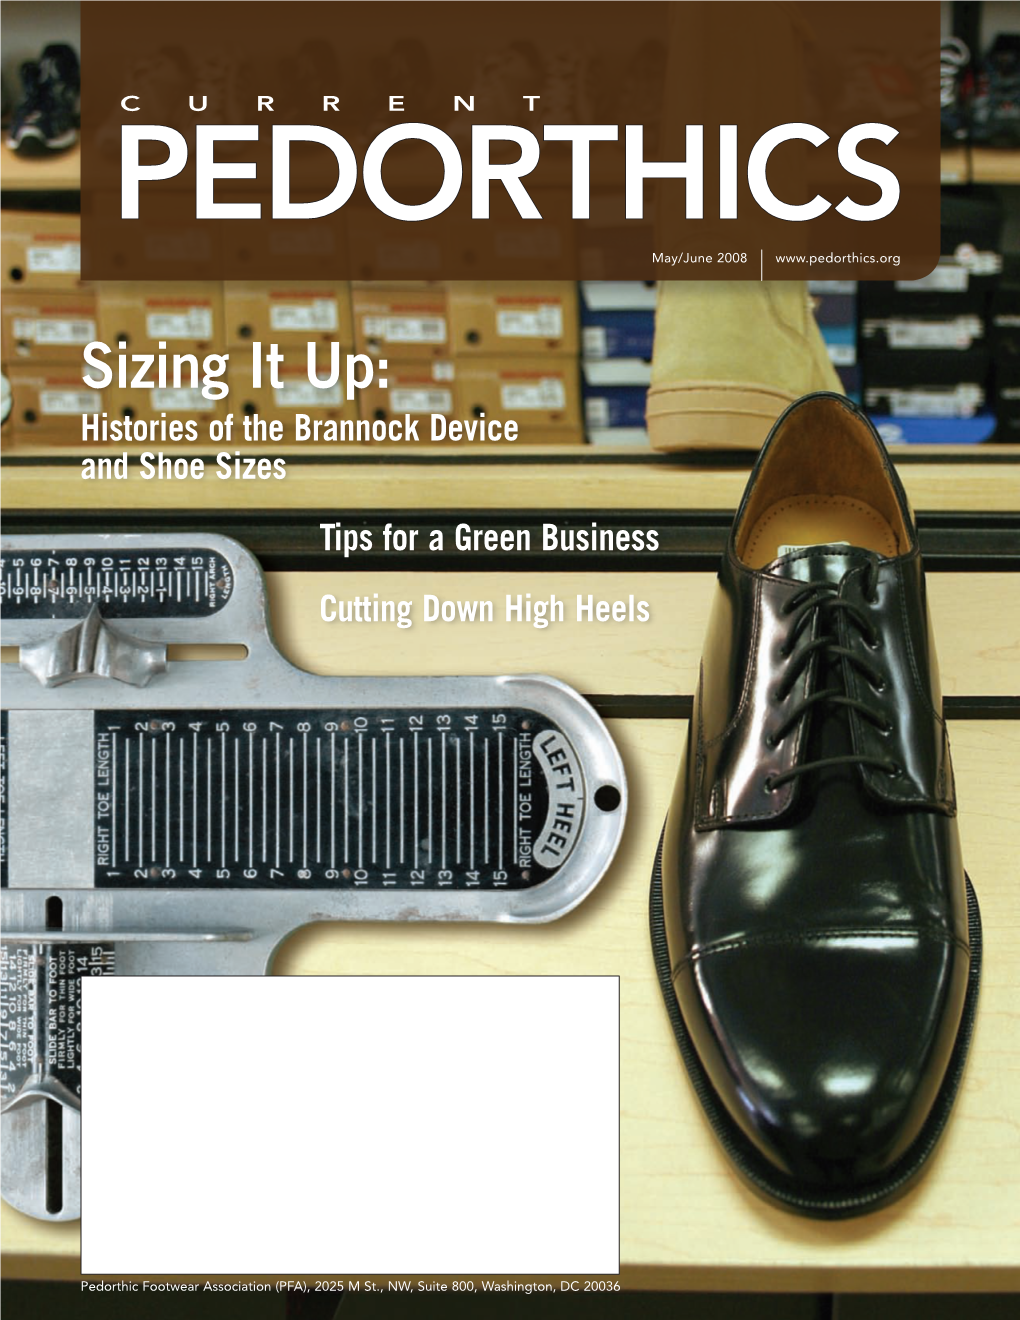 Sizing It Up: Histories of the Brannock Device and Shoe Sizes Tips for a Green Business Cutting Down High Heels